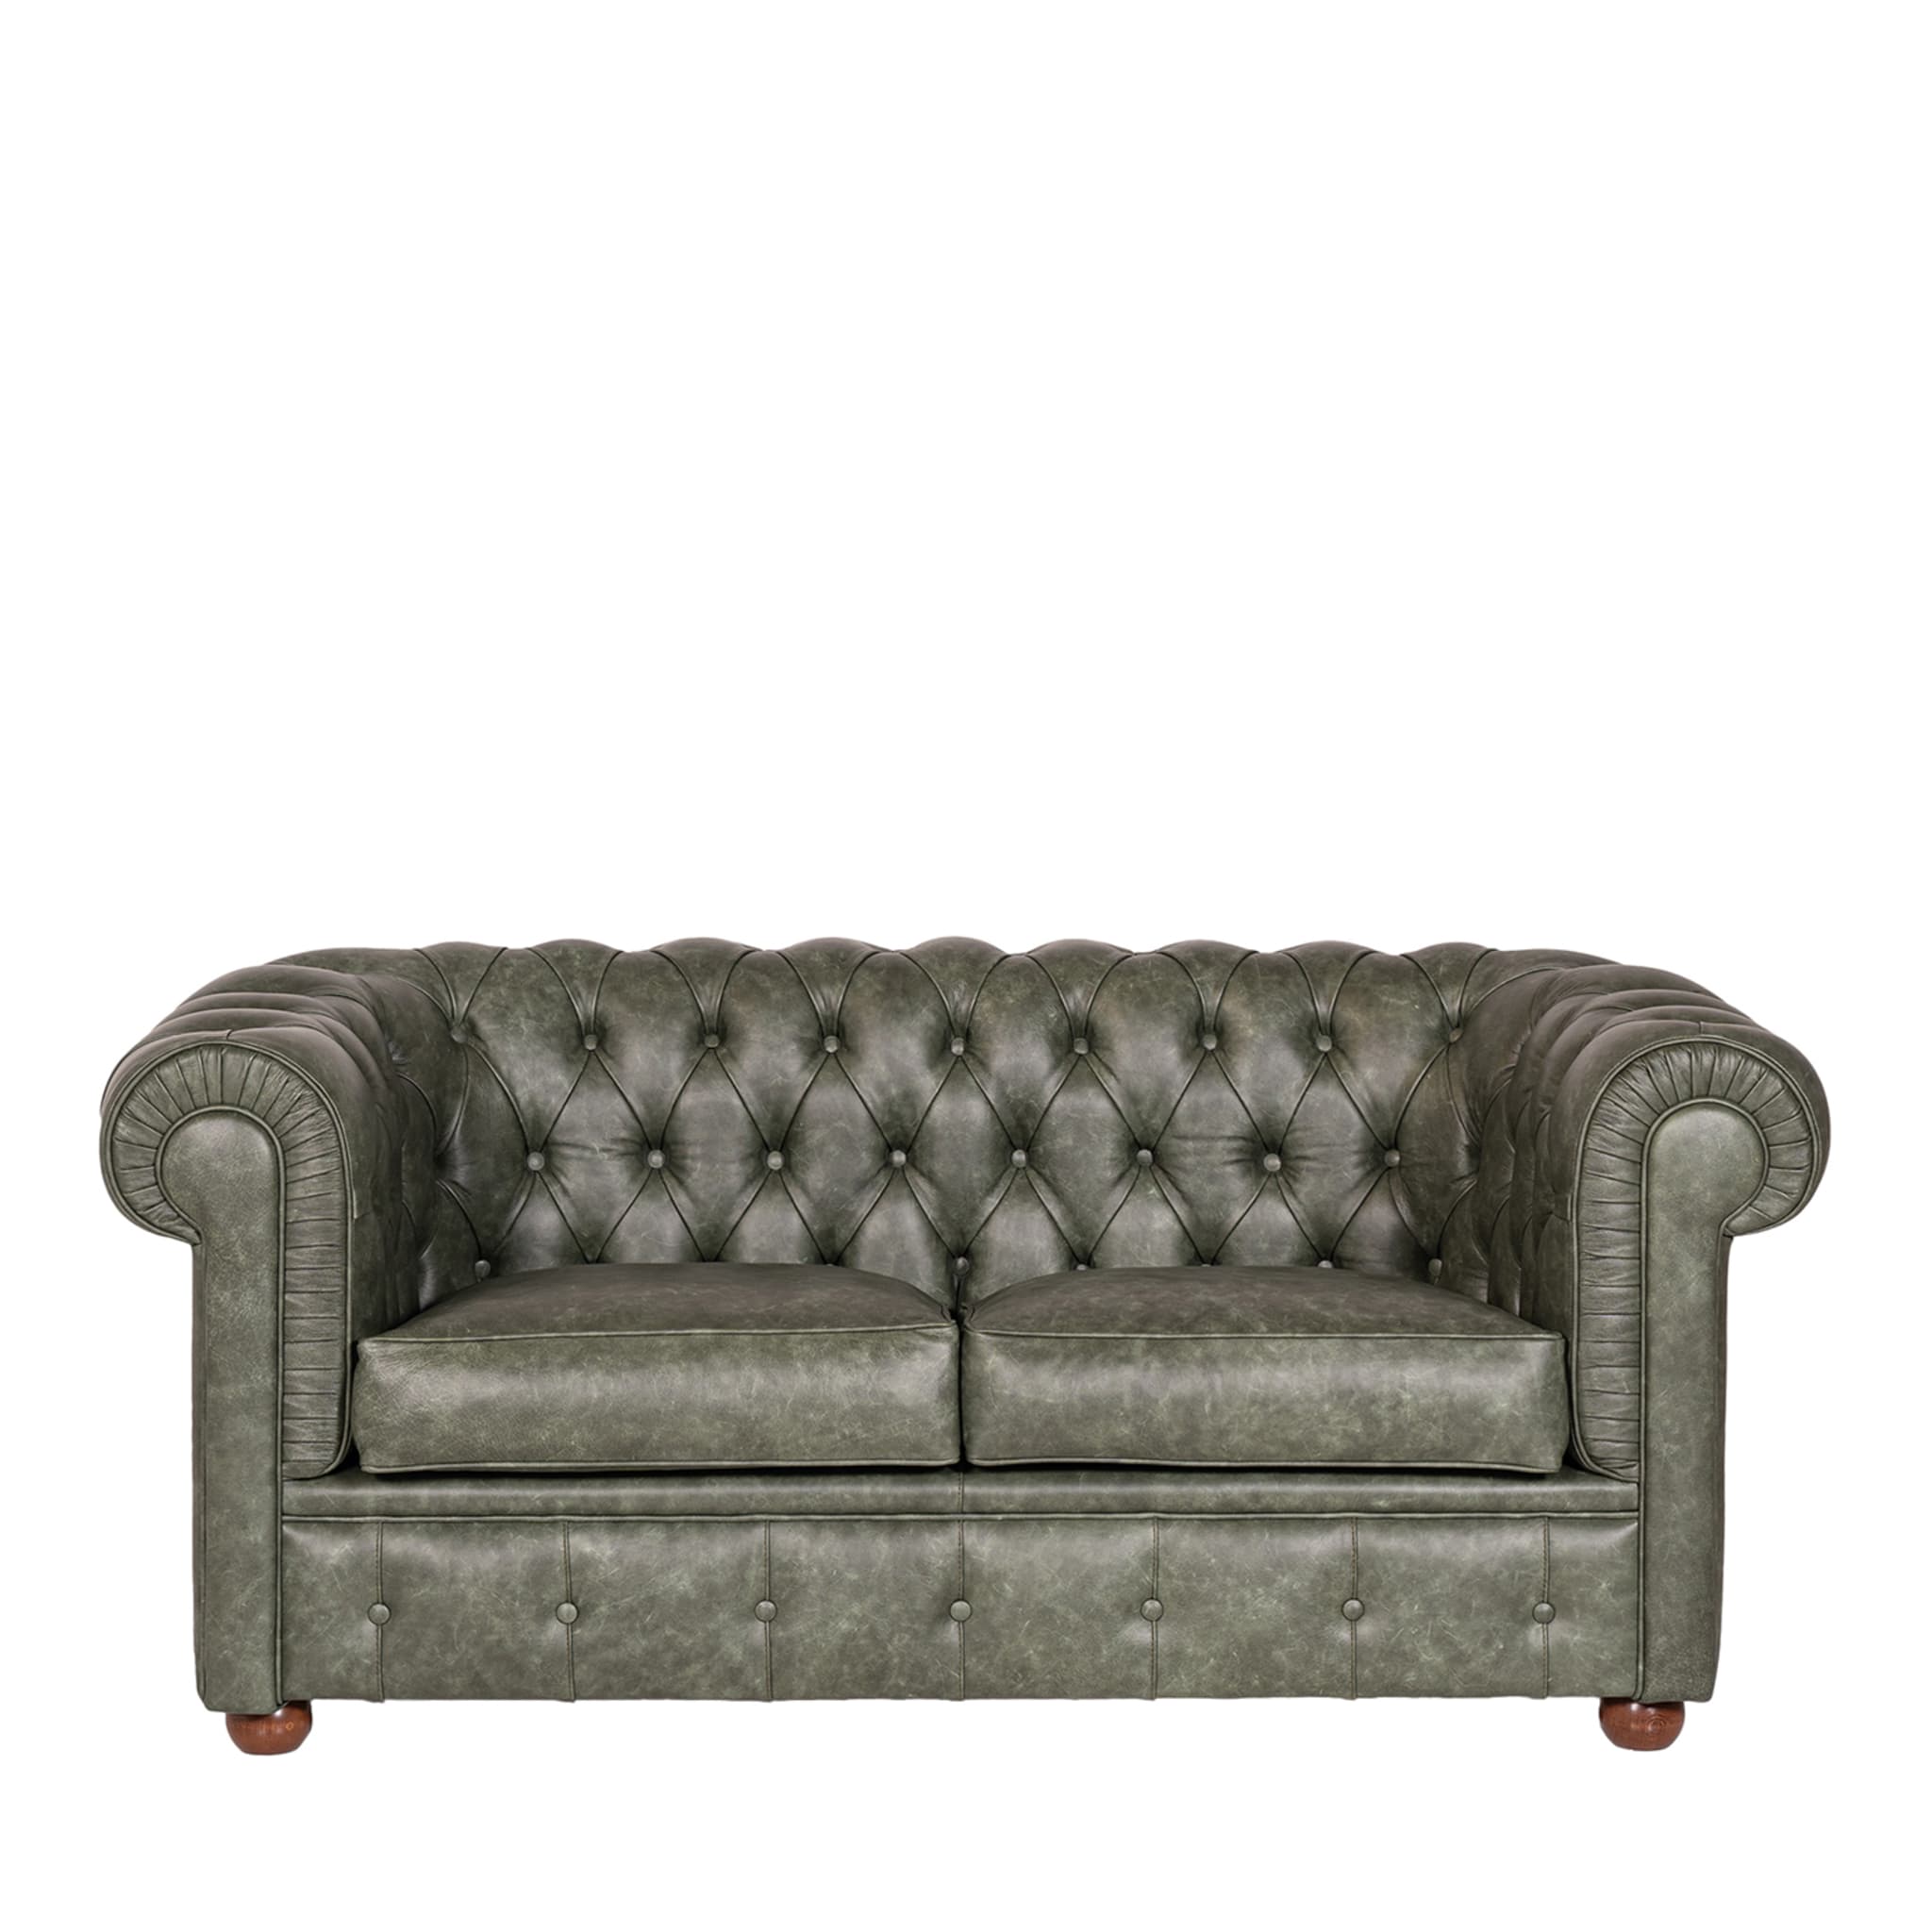 Chesterfield Green Leather Sofa - Main view